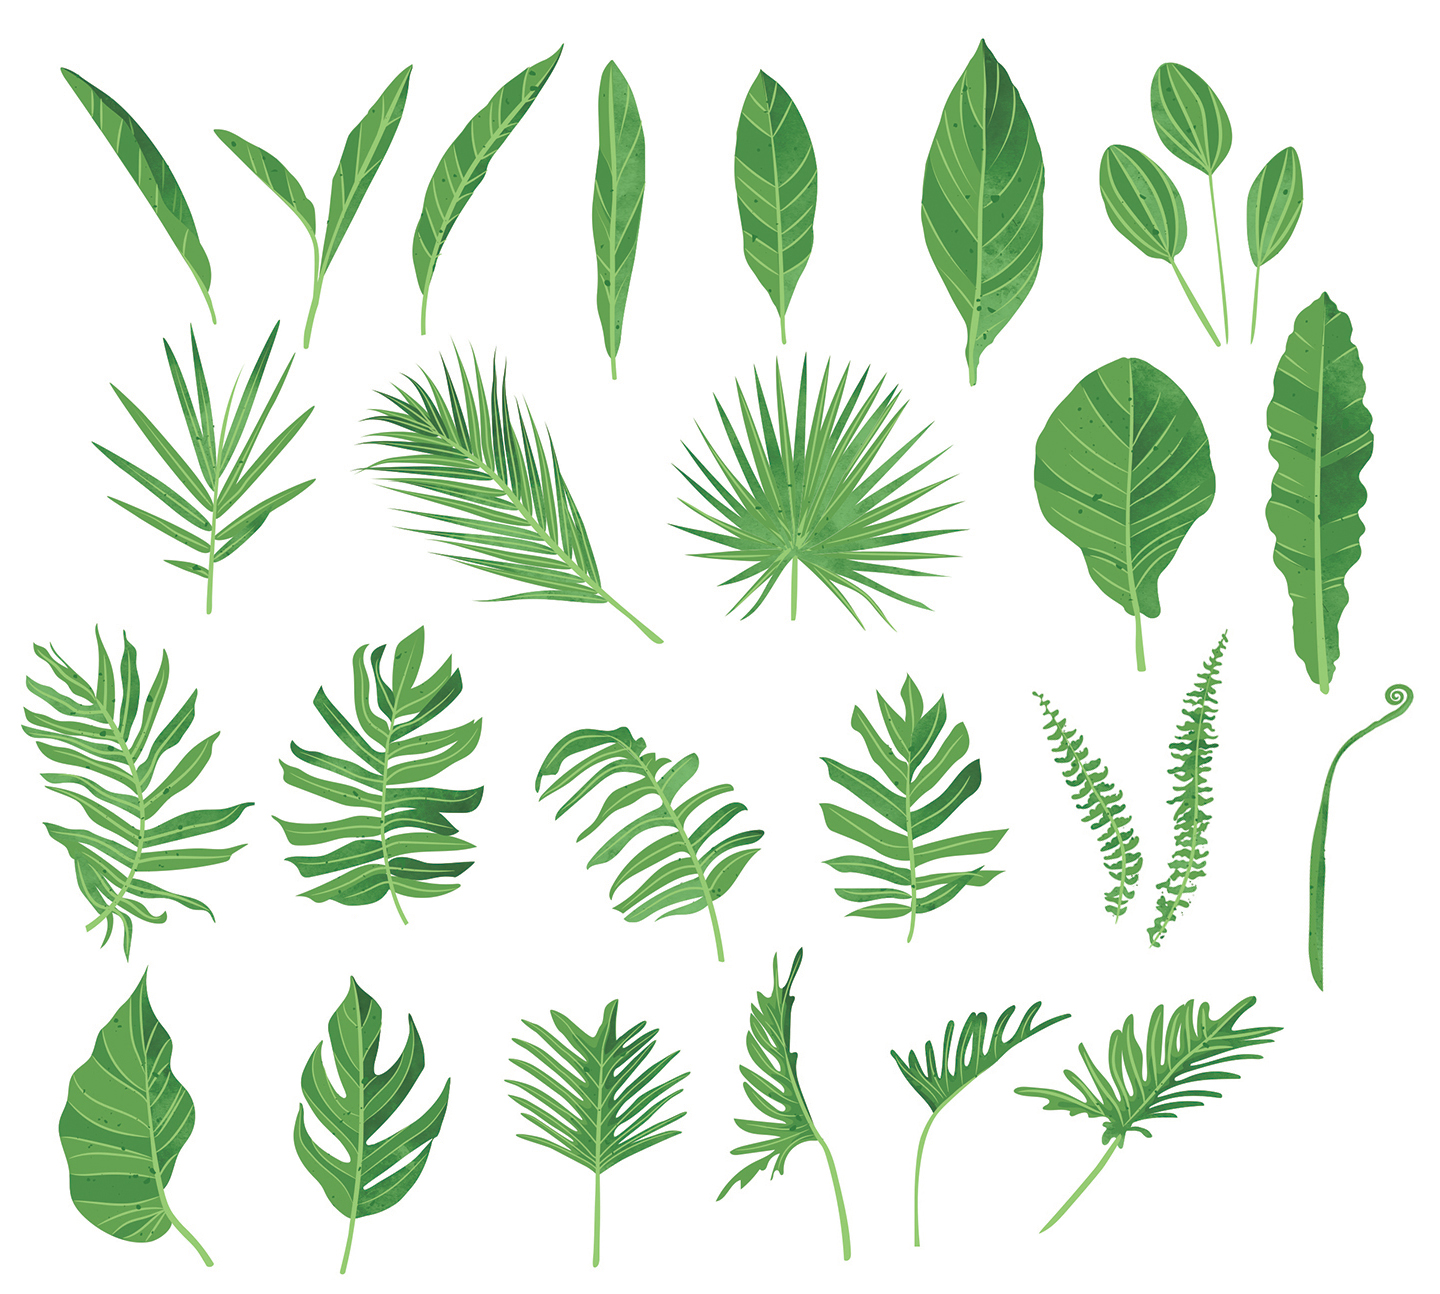 Green Watercolour Leaf/Leaves Vector